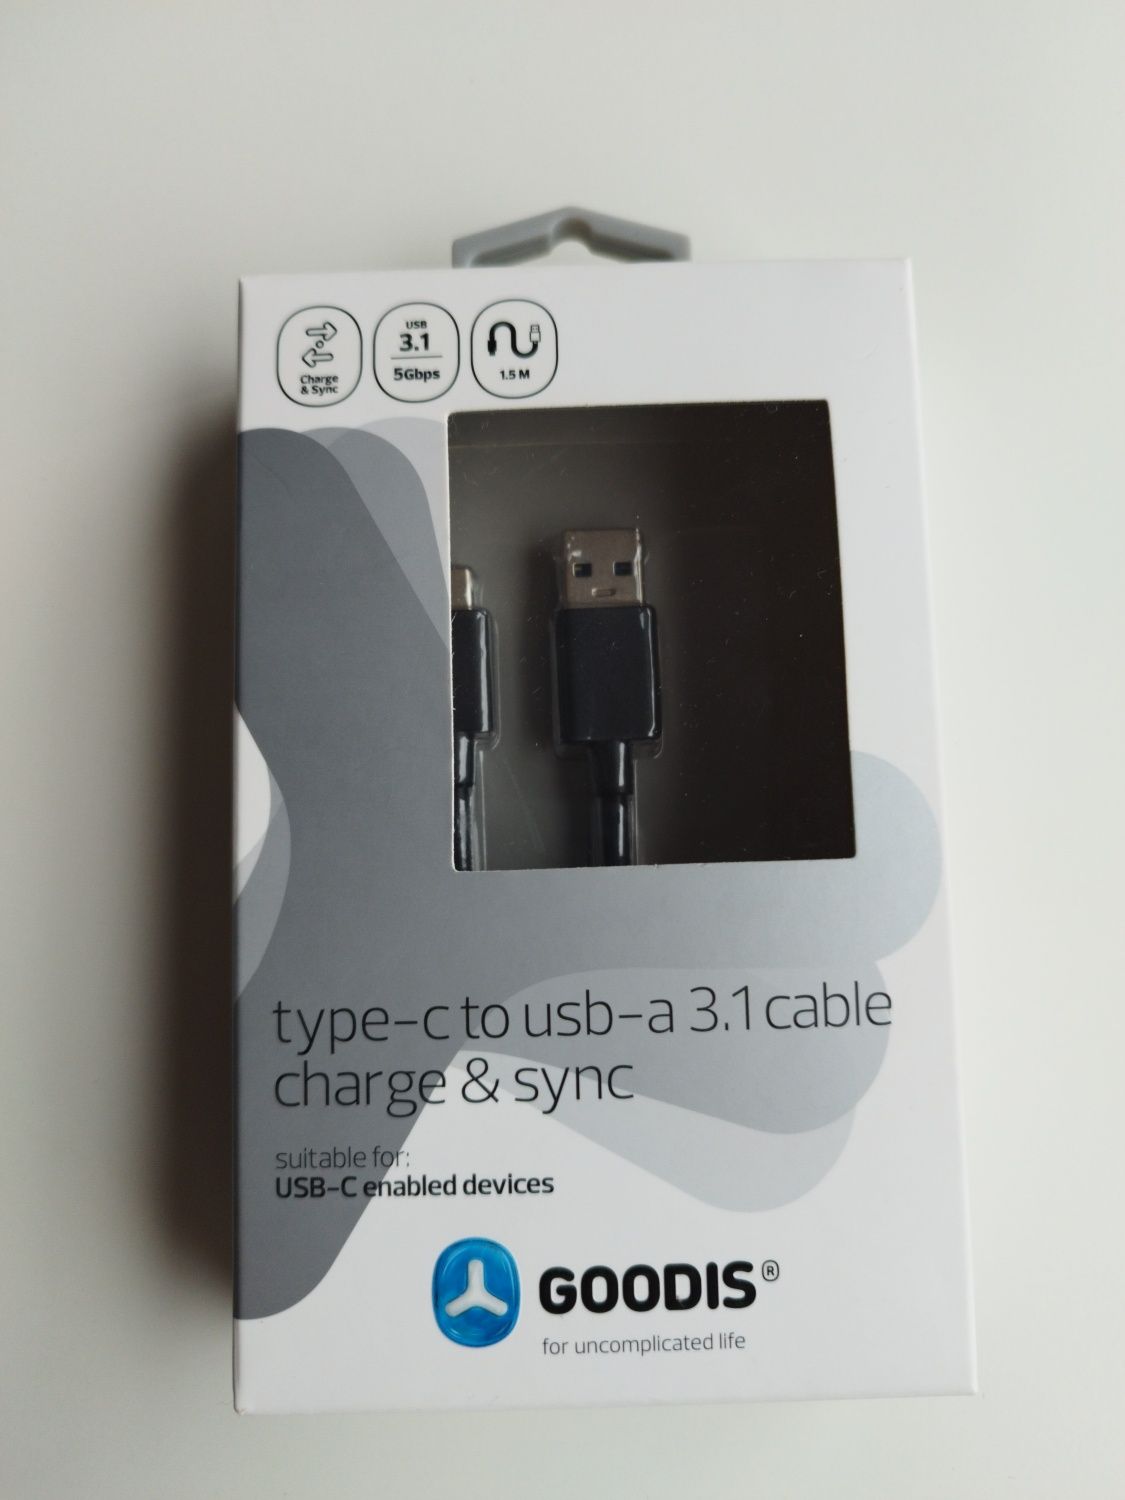 Cabo goodis type c to USB a